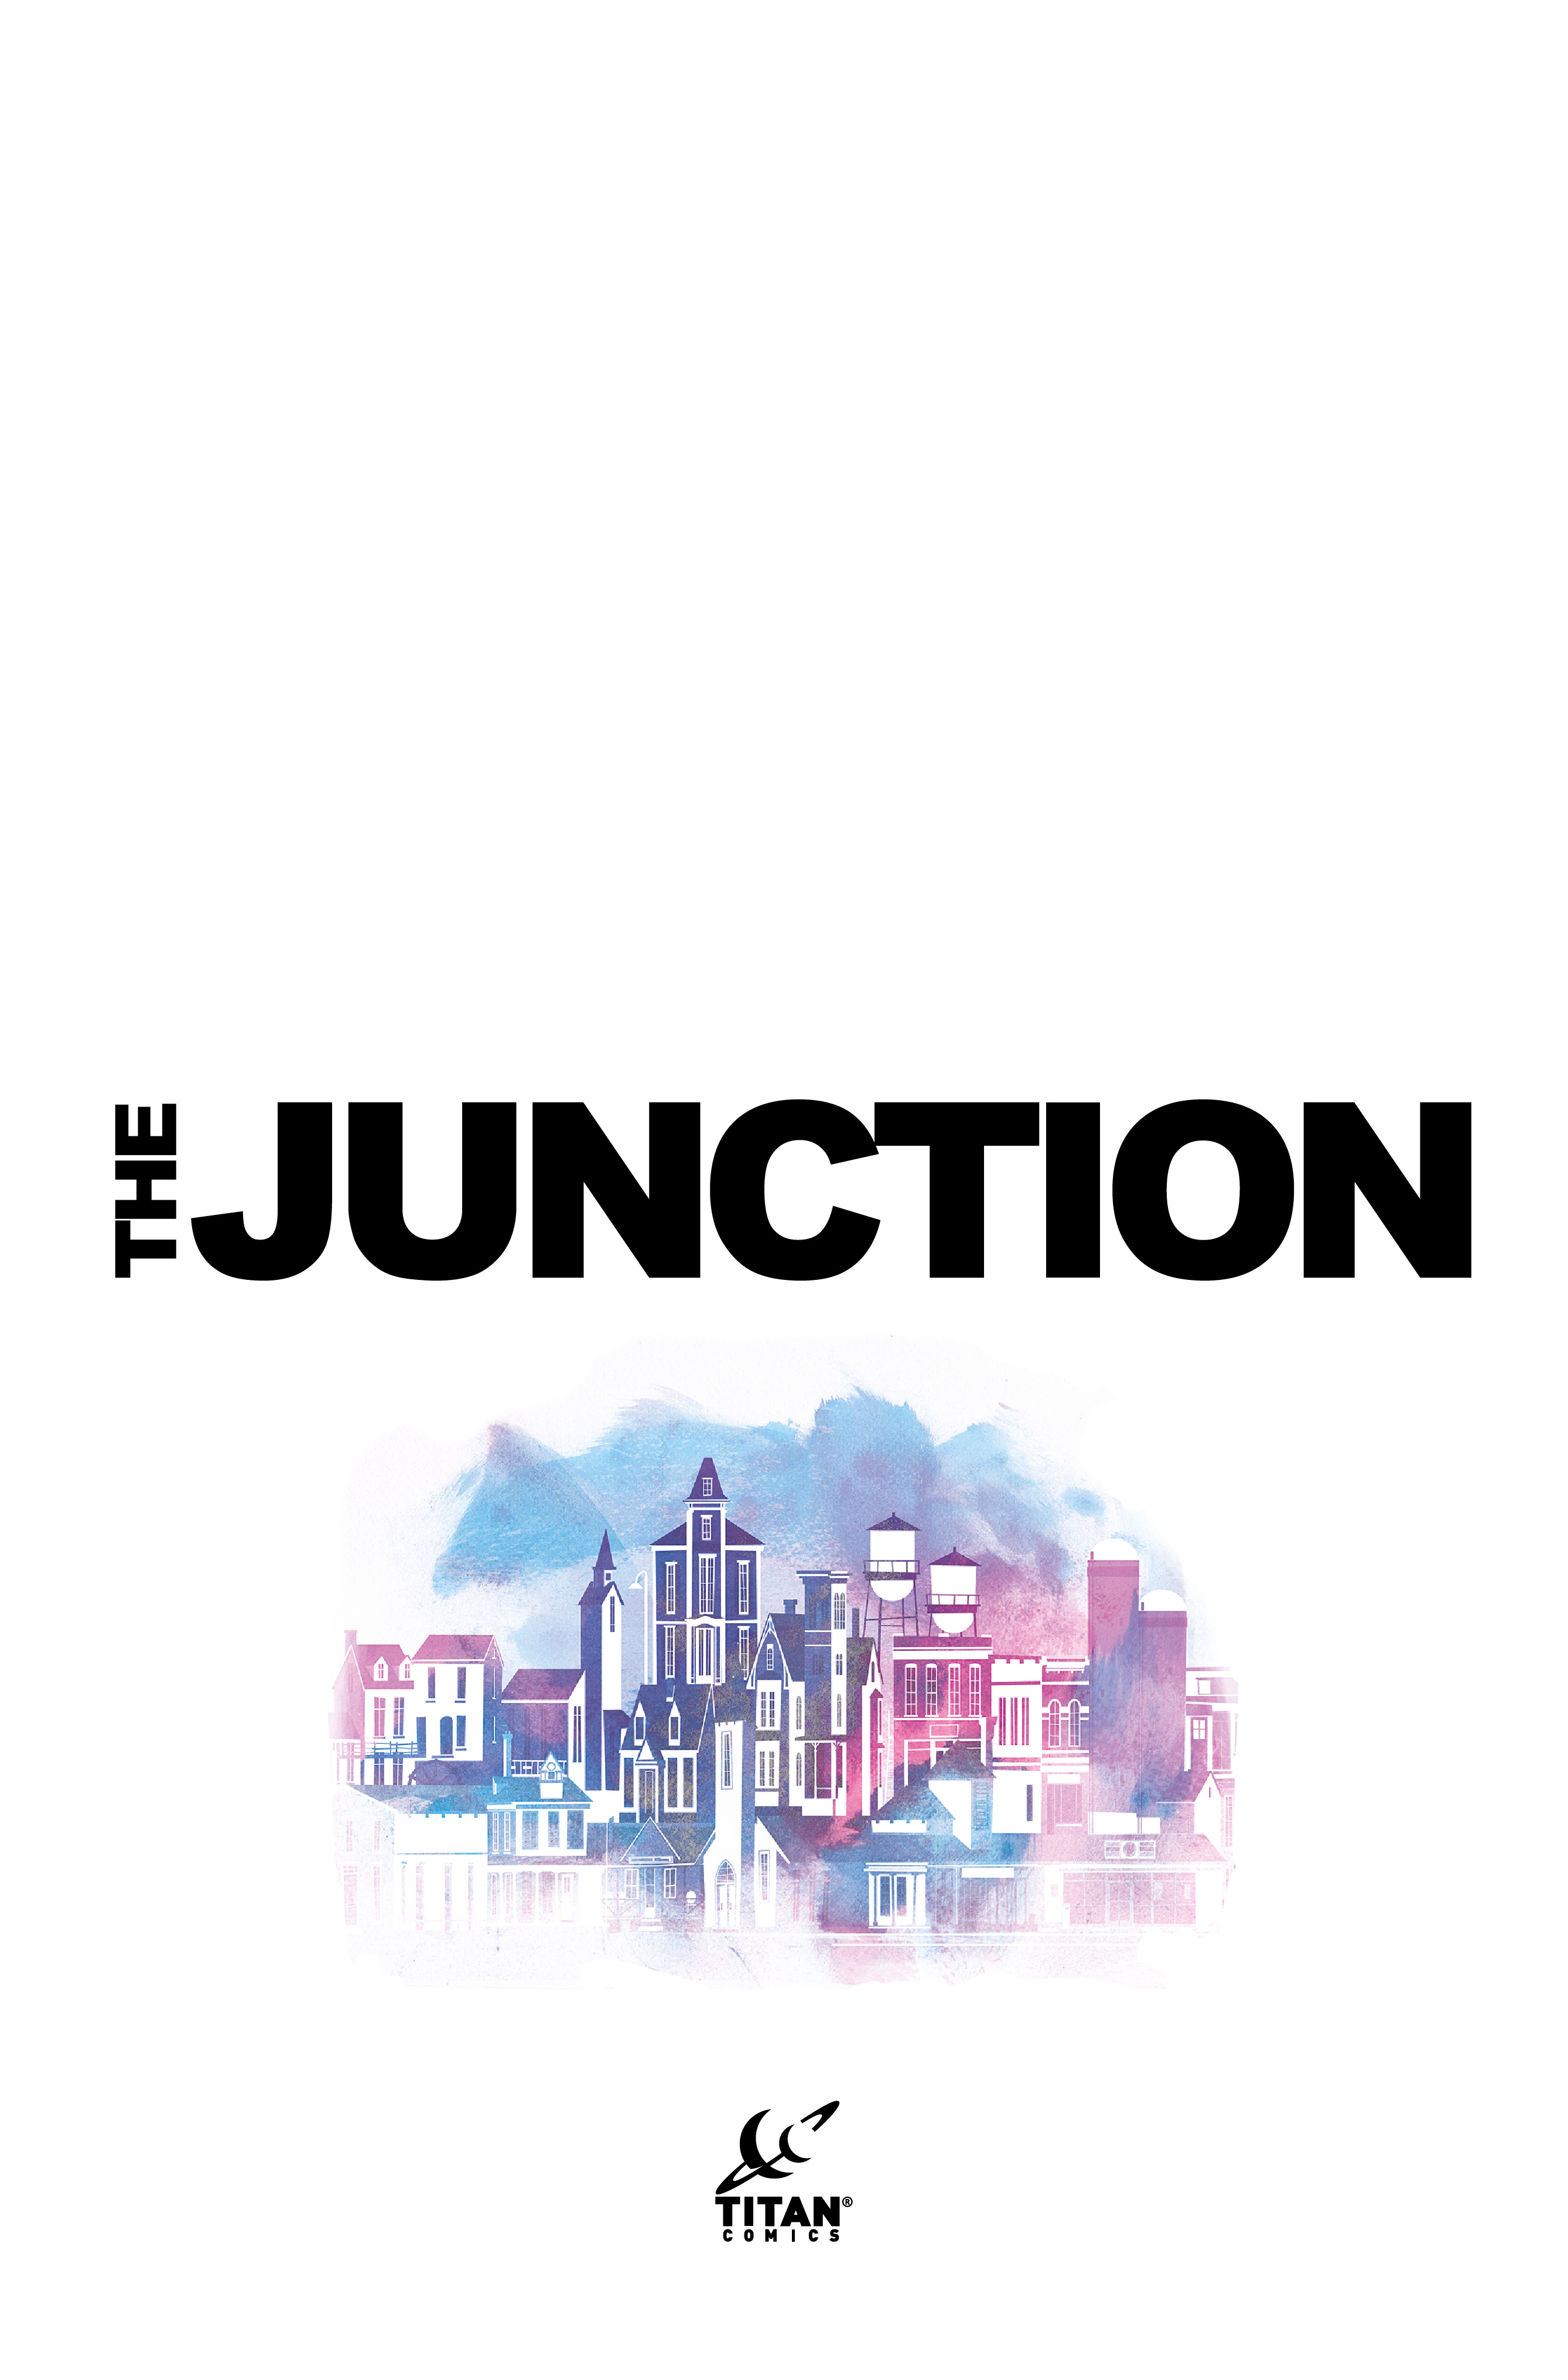 Read online The Junction comic -  Issue # TPB (Part 1) - 2